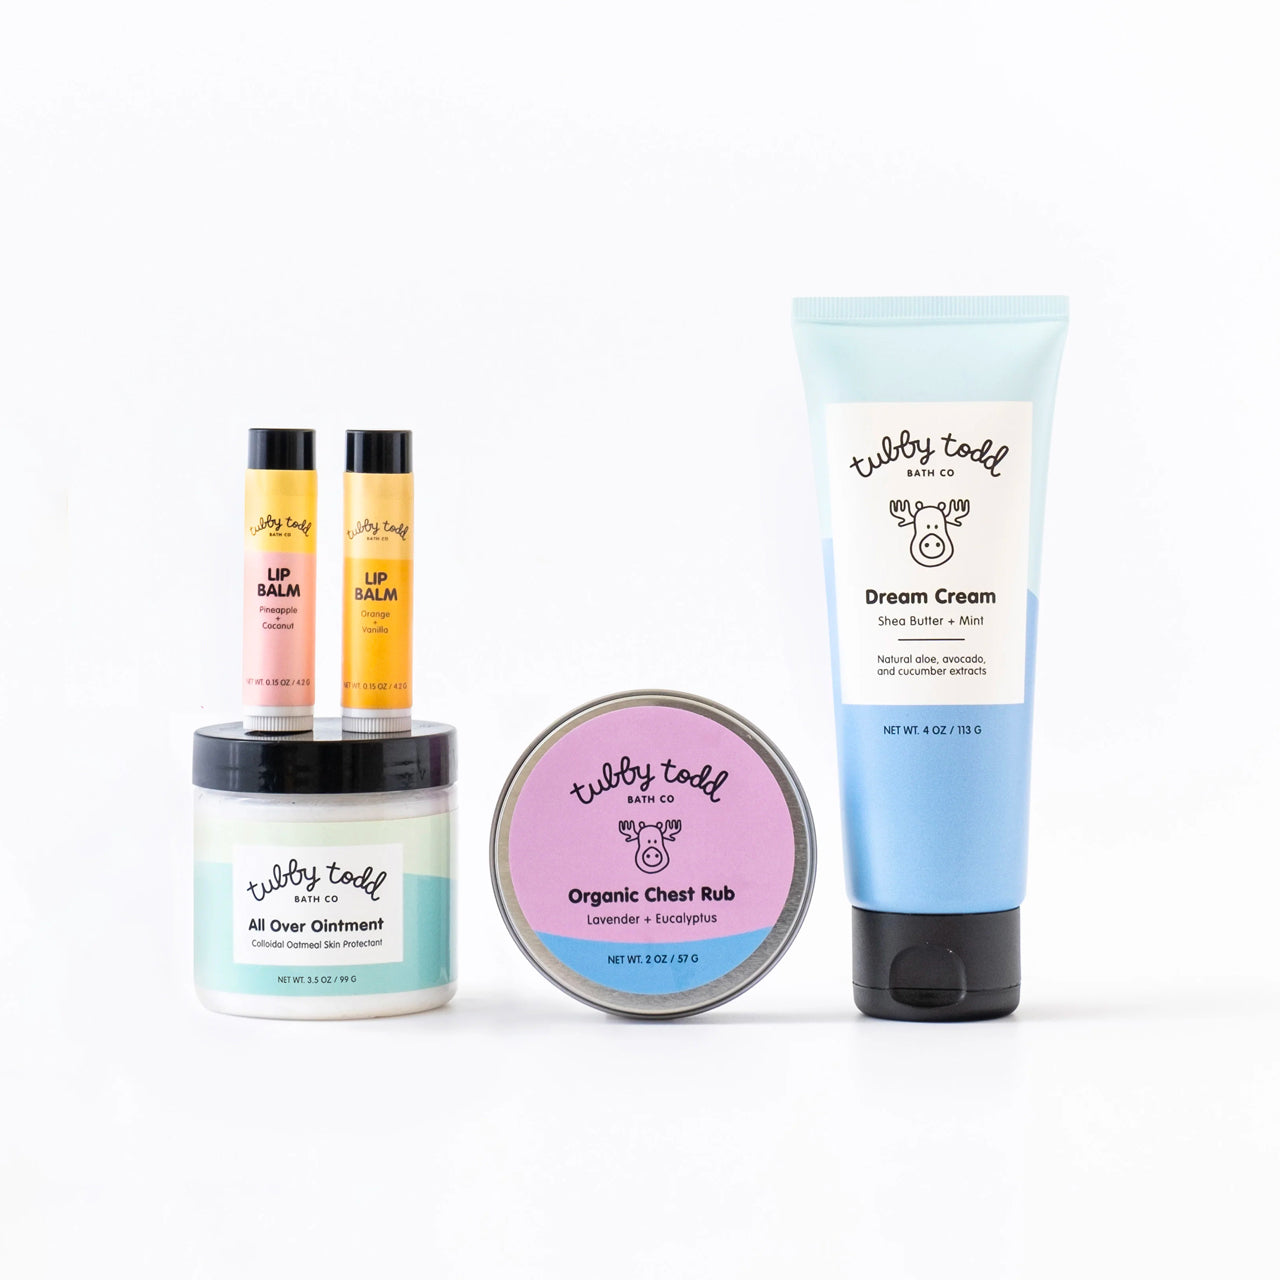 Winter Bundle including: All Over Ointment, Lip Balms, Chest Rub and Dream Cream